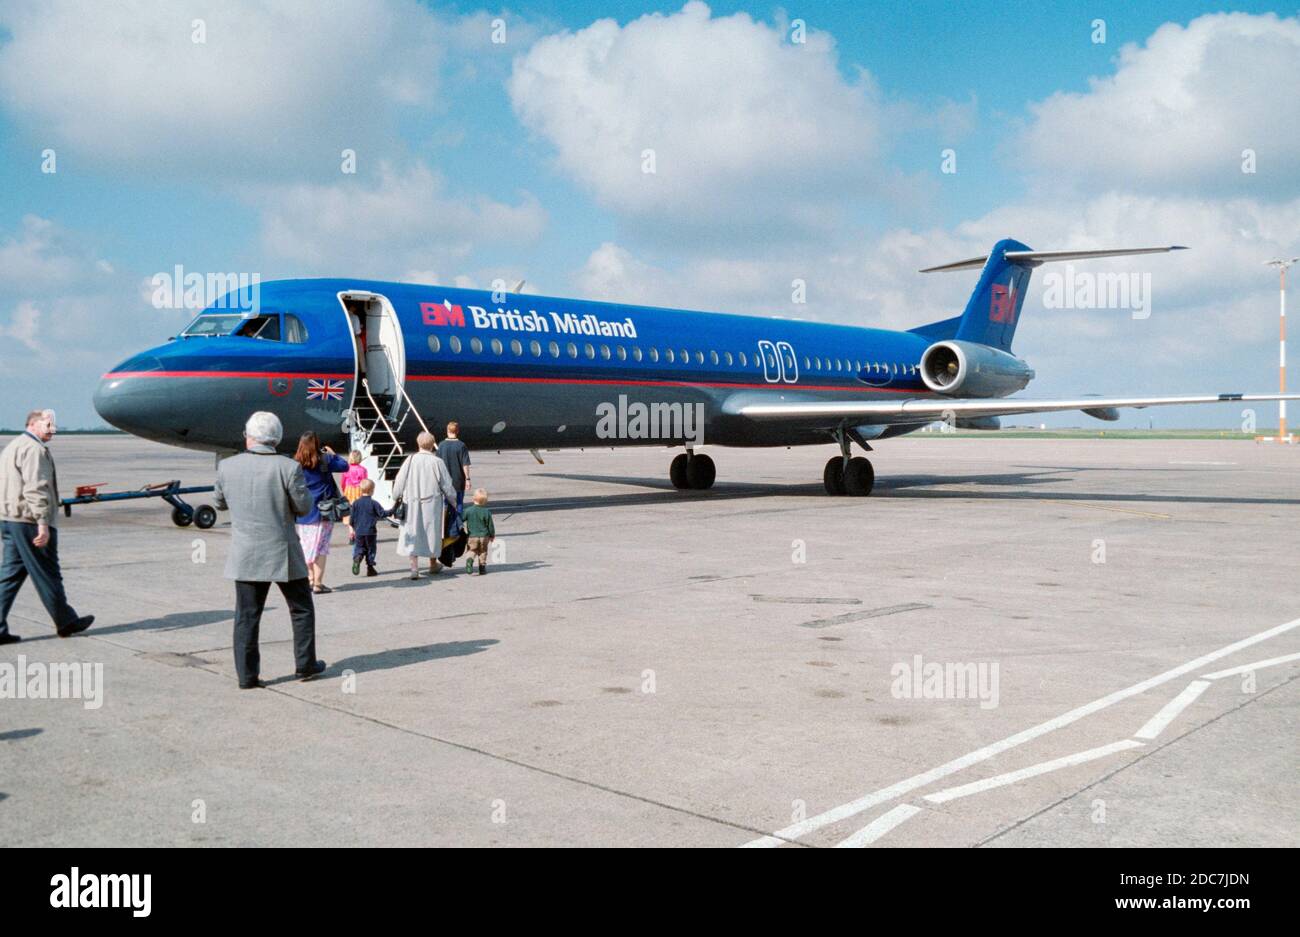 A British Midland Airways Douglas DC-9 on the tarmac at an airport in England during the 1990s. Then front steps are down and passengers are  boarding the aircraft. Stock Photo